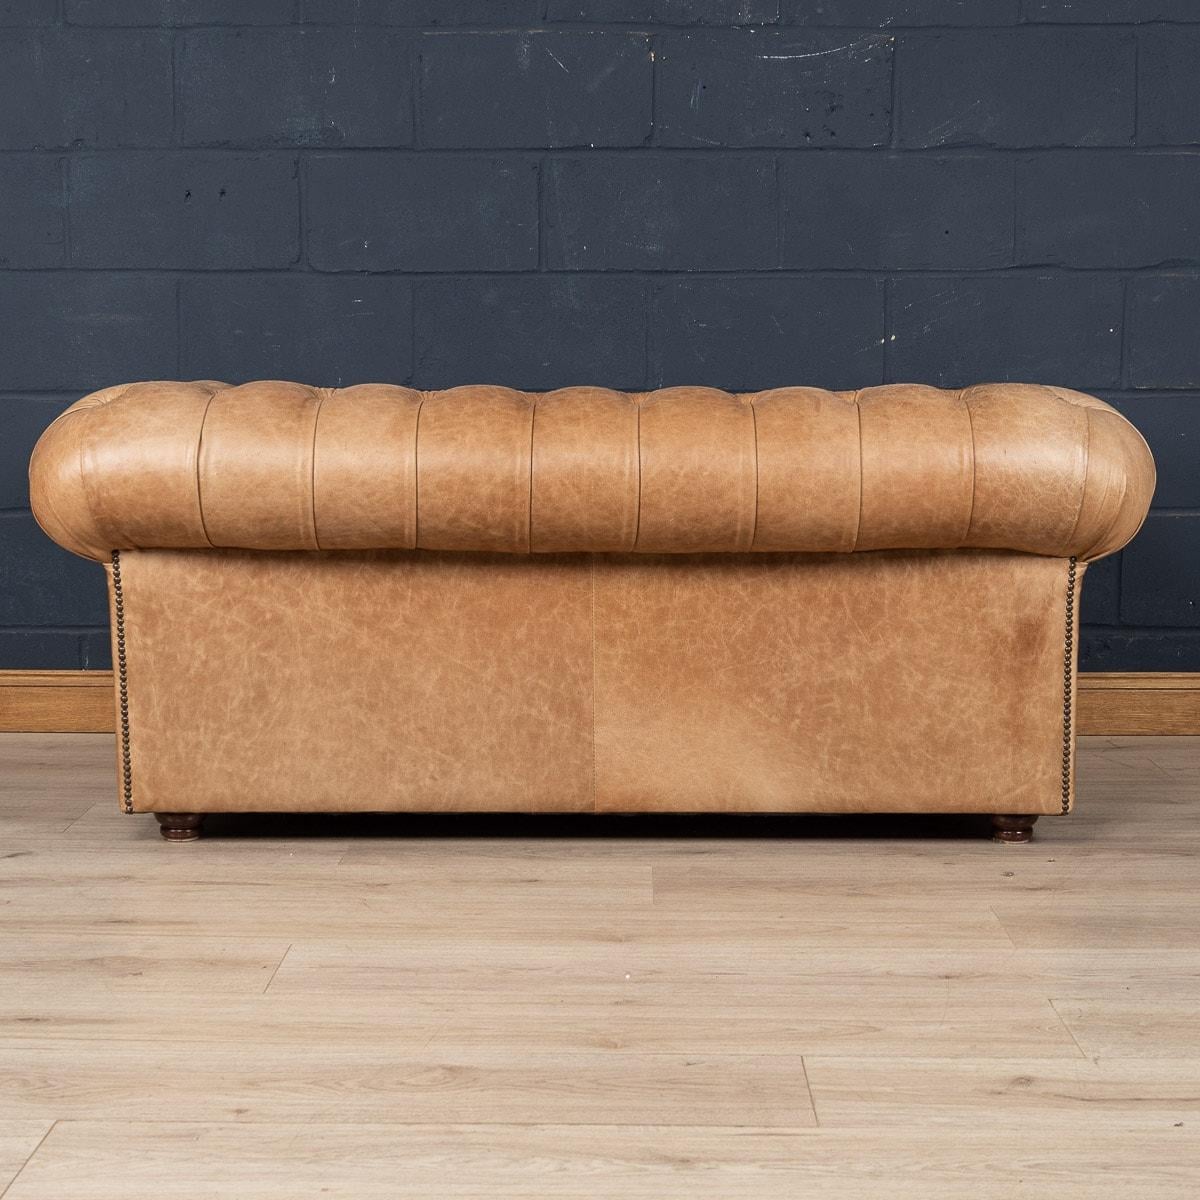 20th Century English Chesterfield Leather Sofa 1